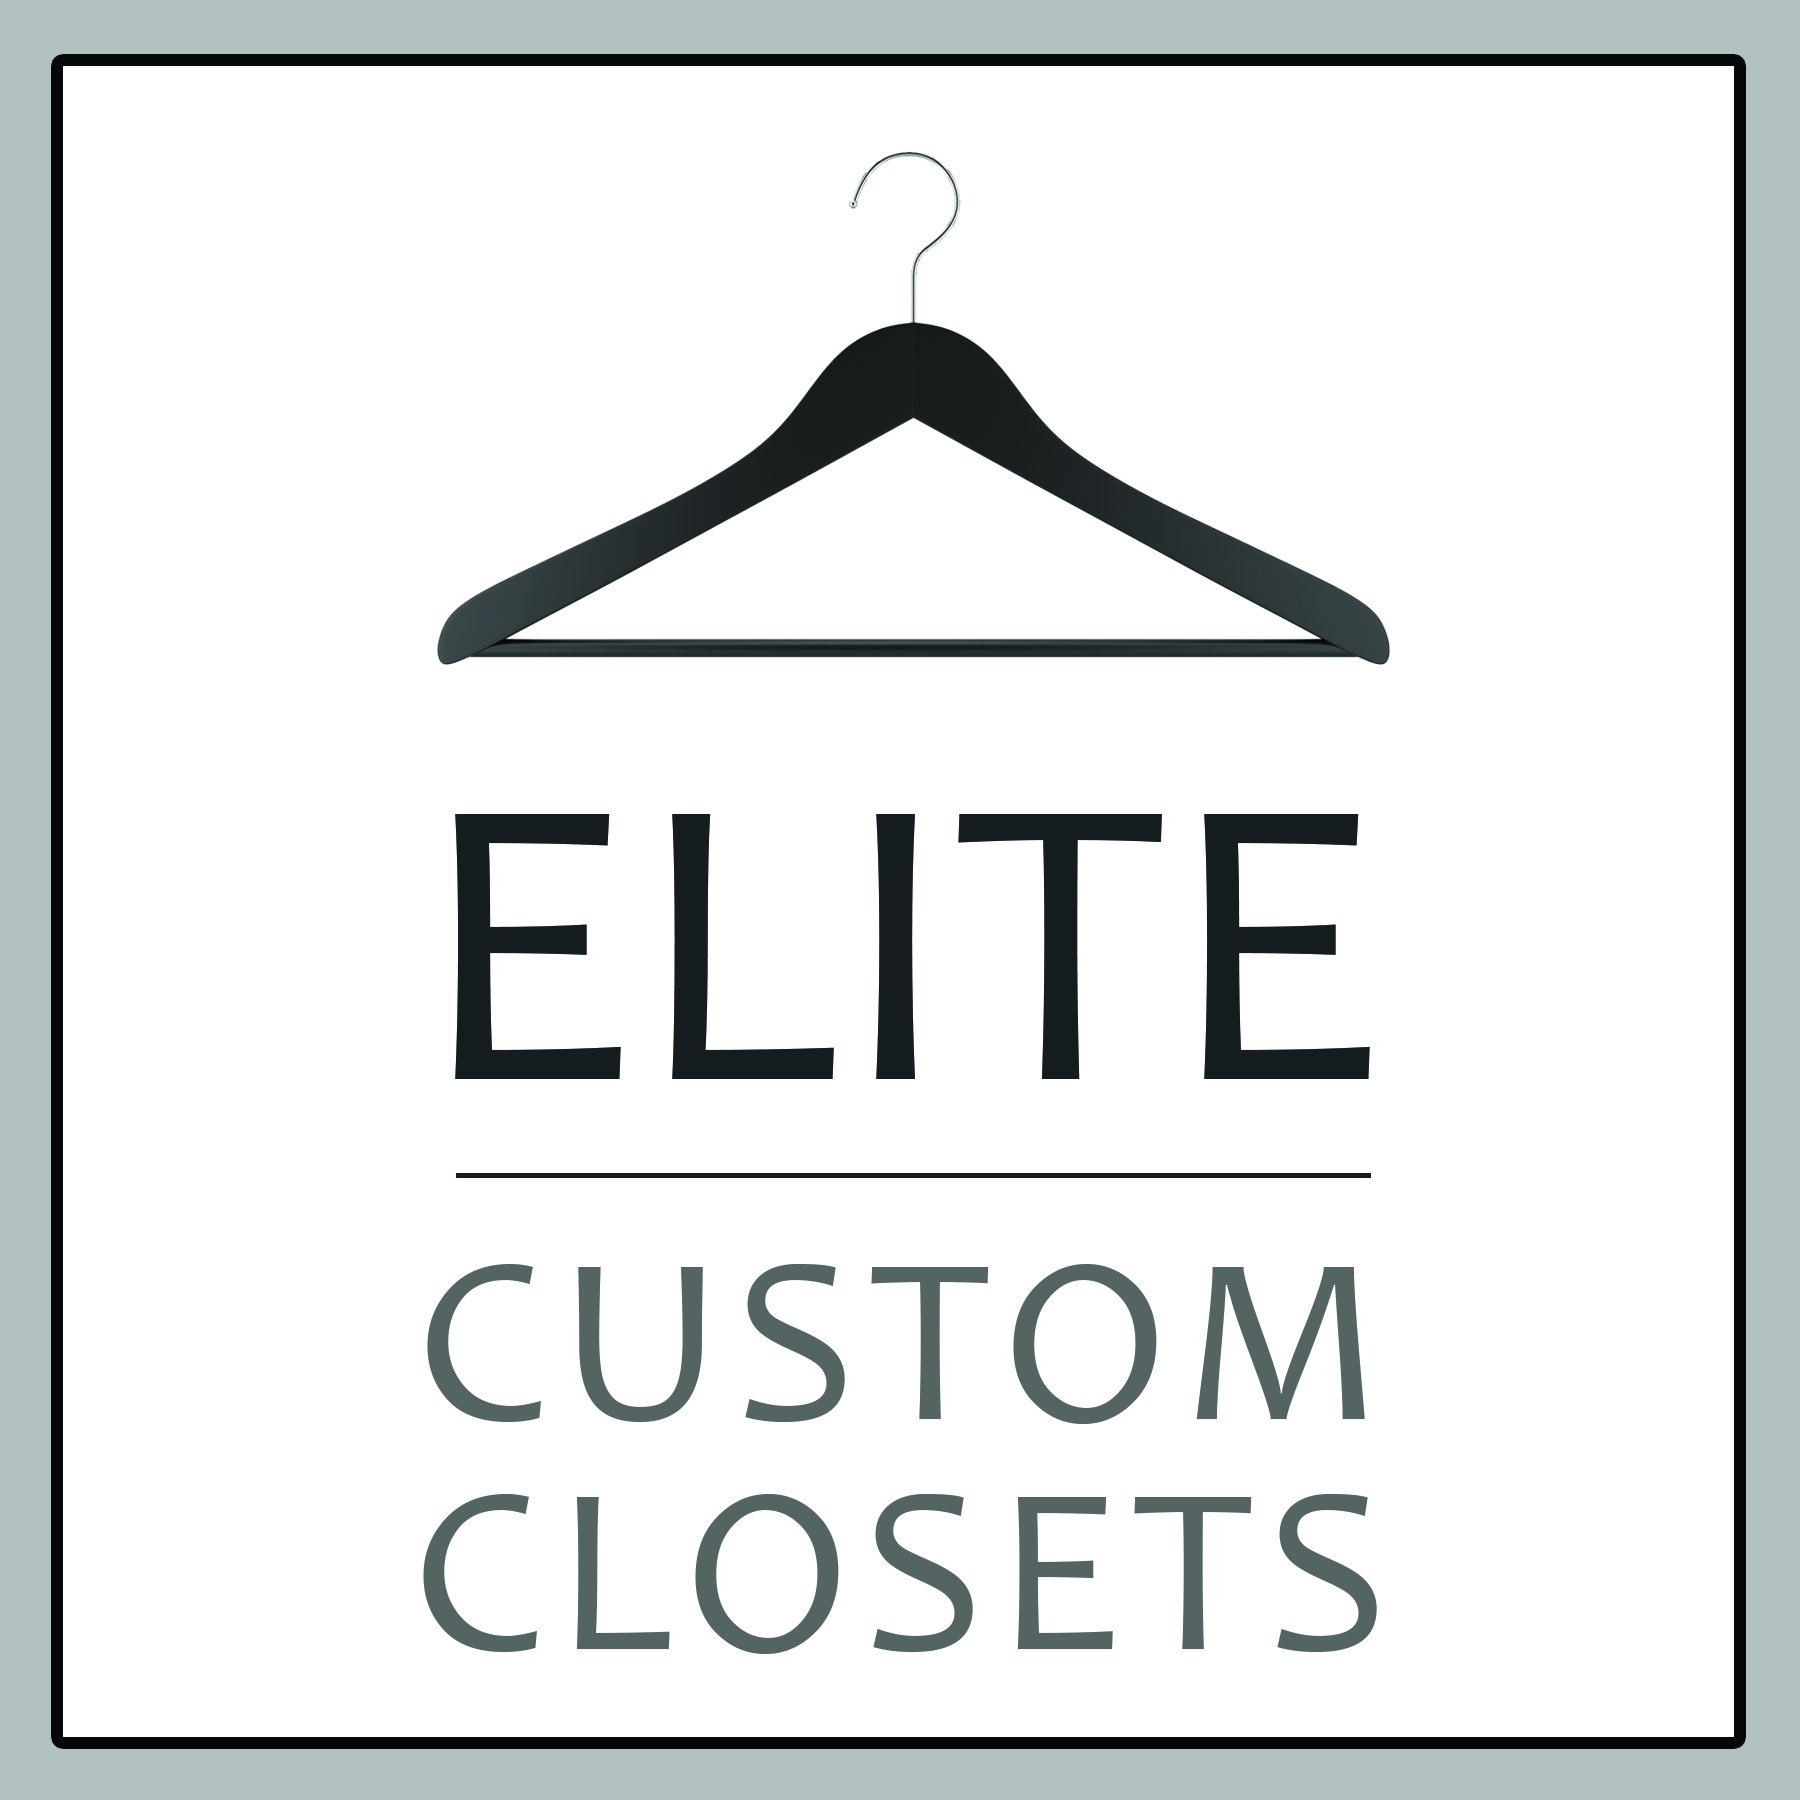 If insufficient storage is your problem, Elite Closets can help!  Come visit the Elite Closet showroom and get hands on with our many displays.